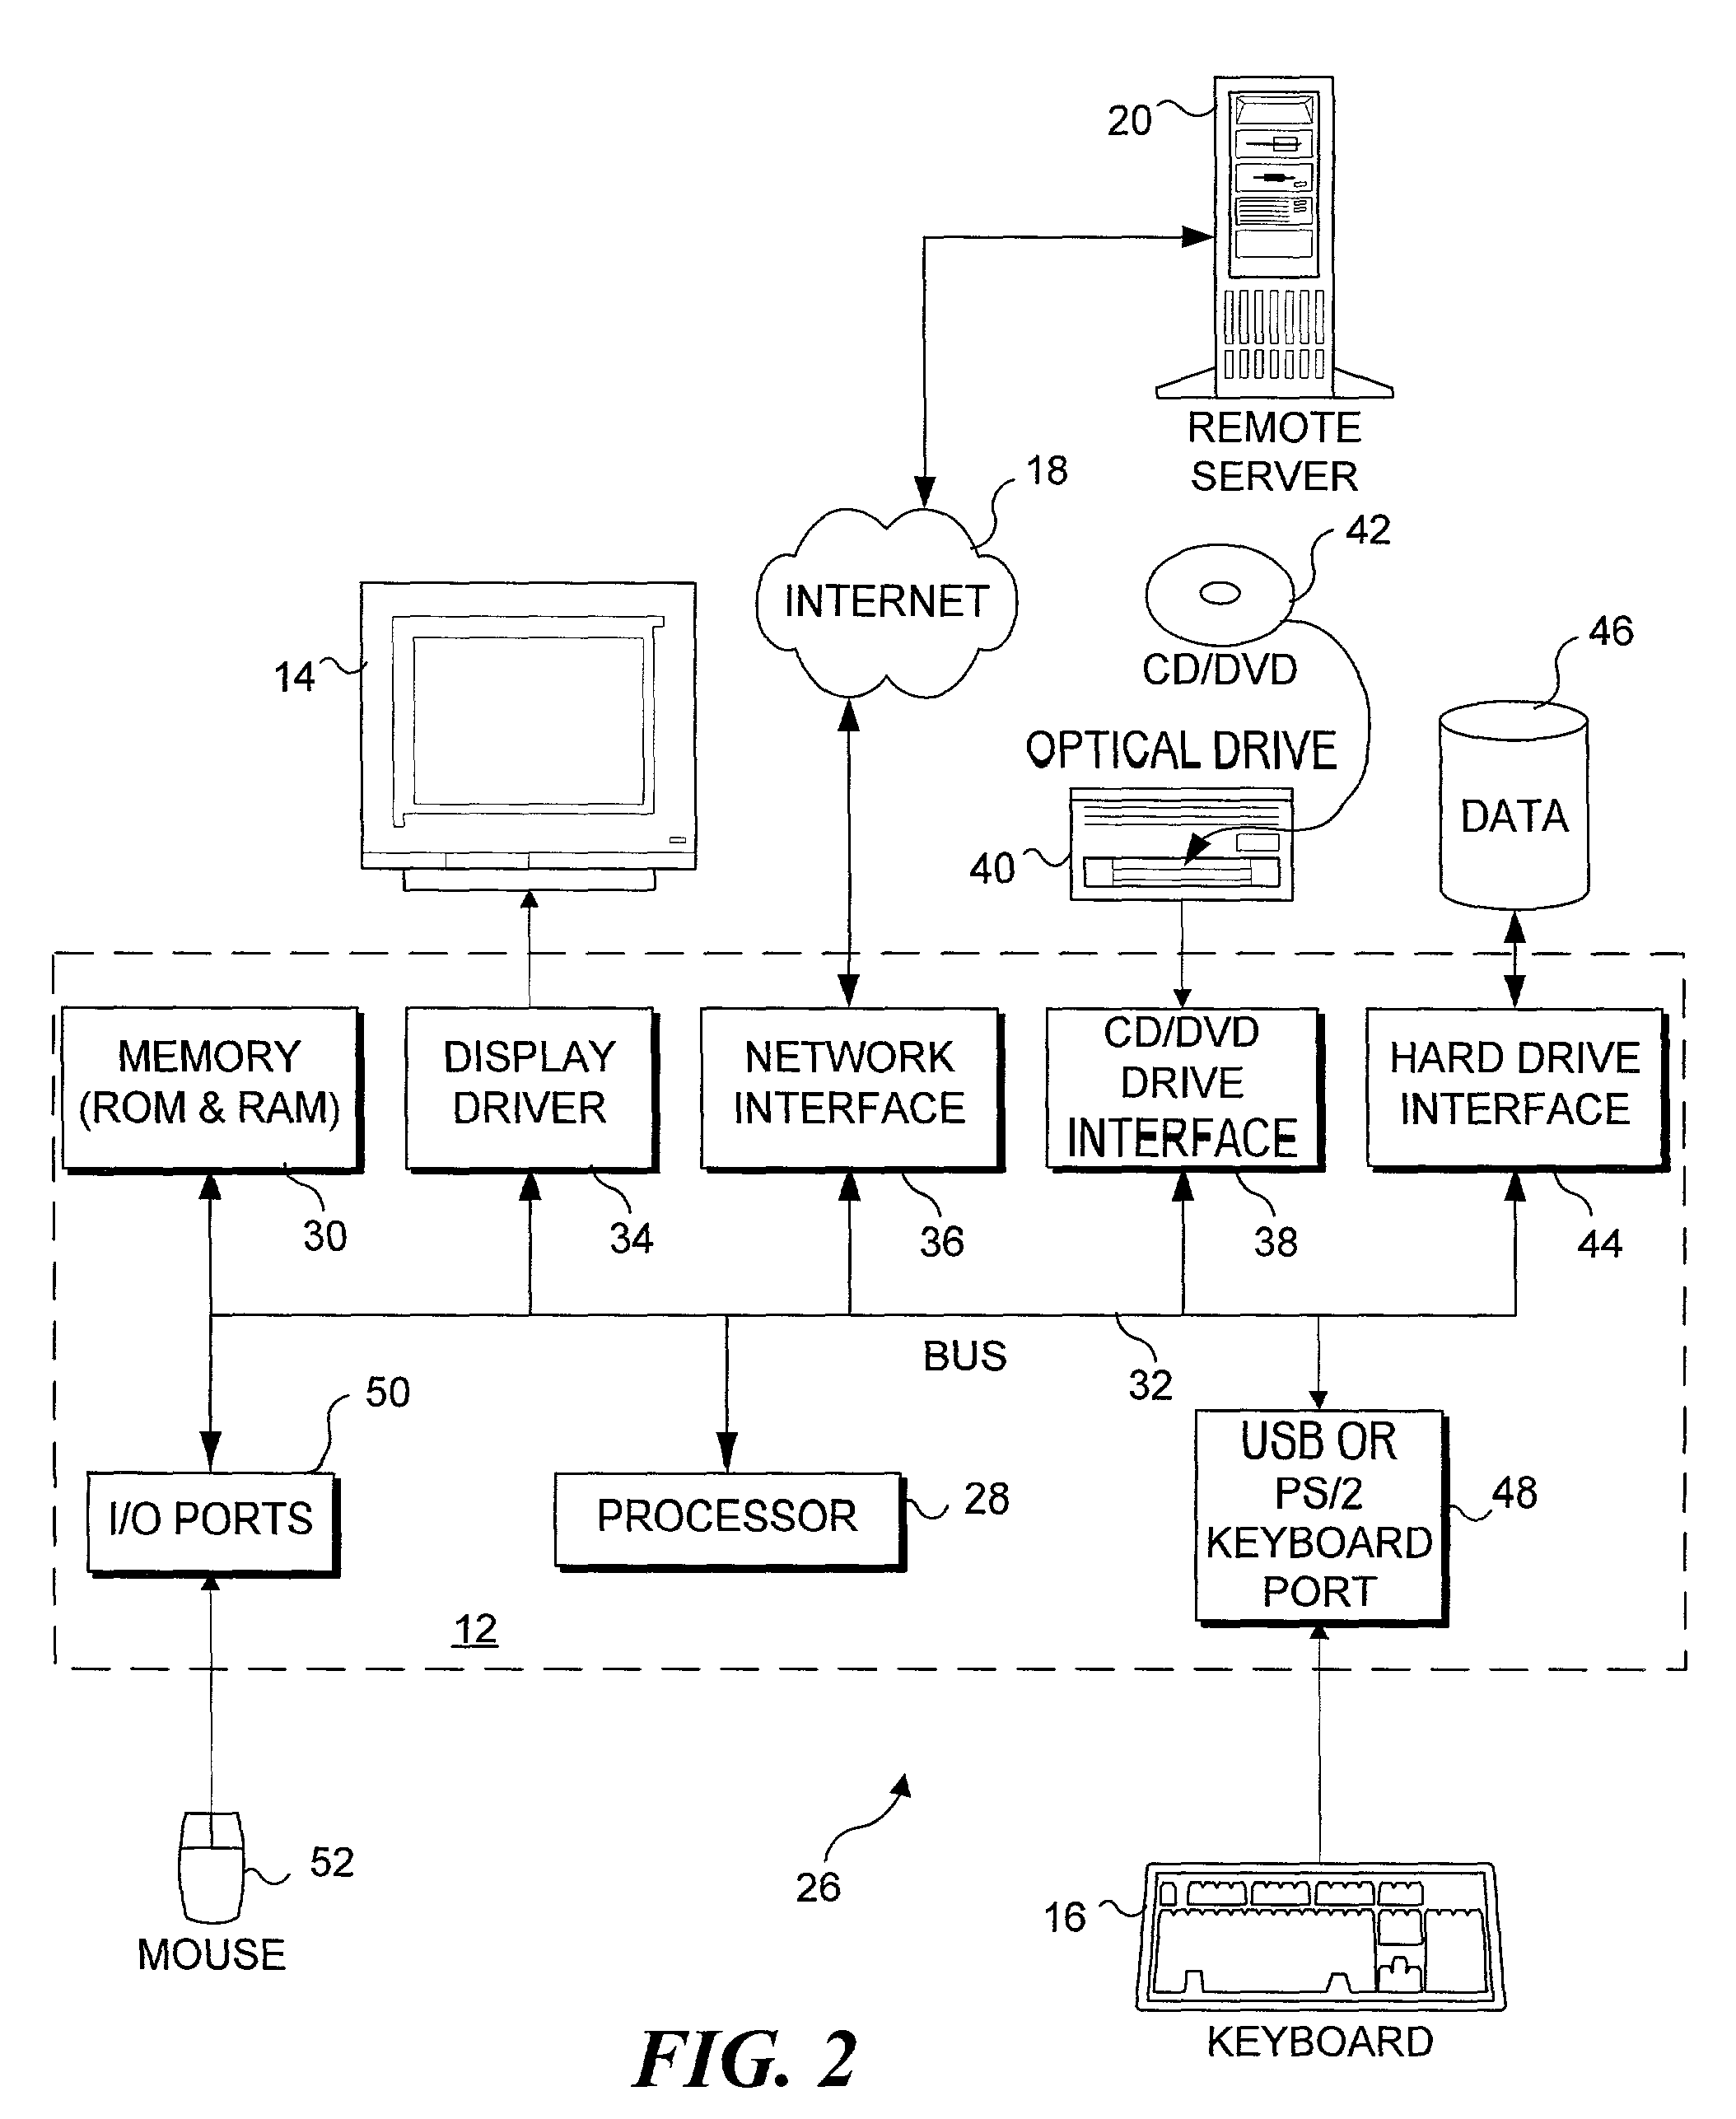 Method and system for monitoring the performance of a distributed application